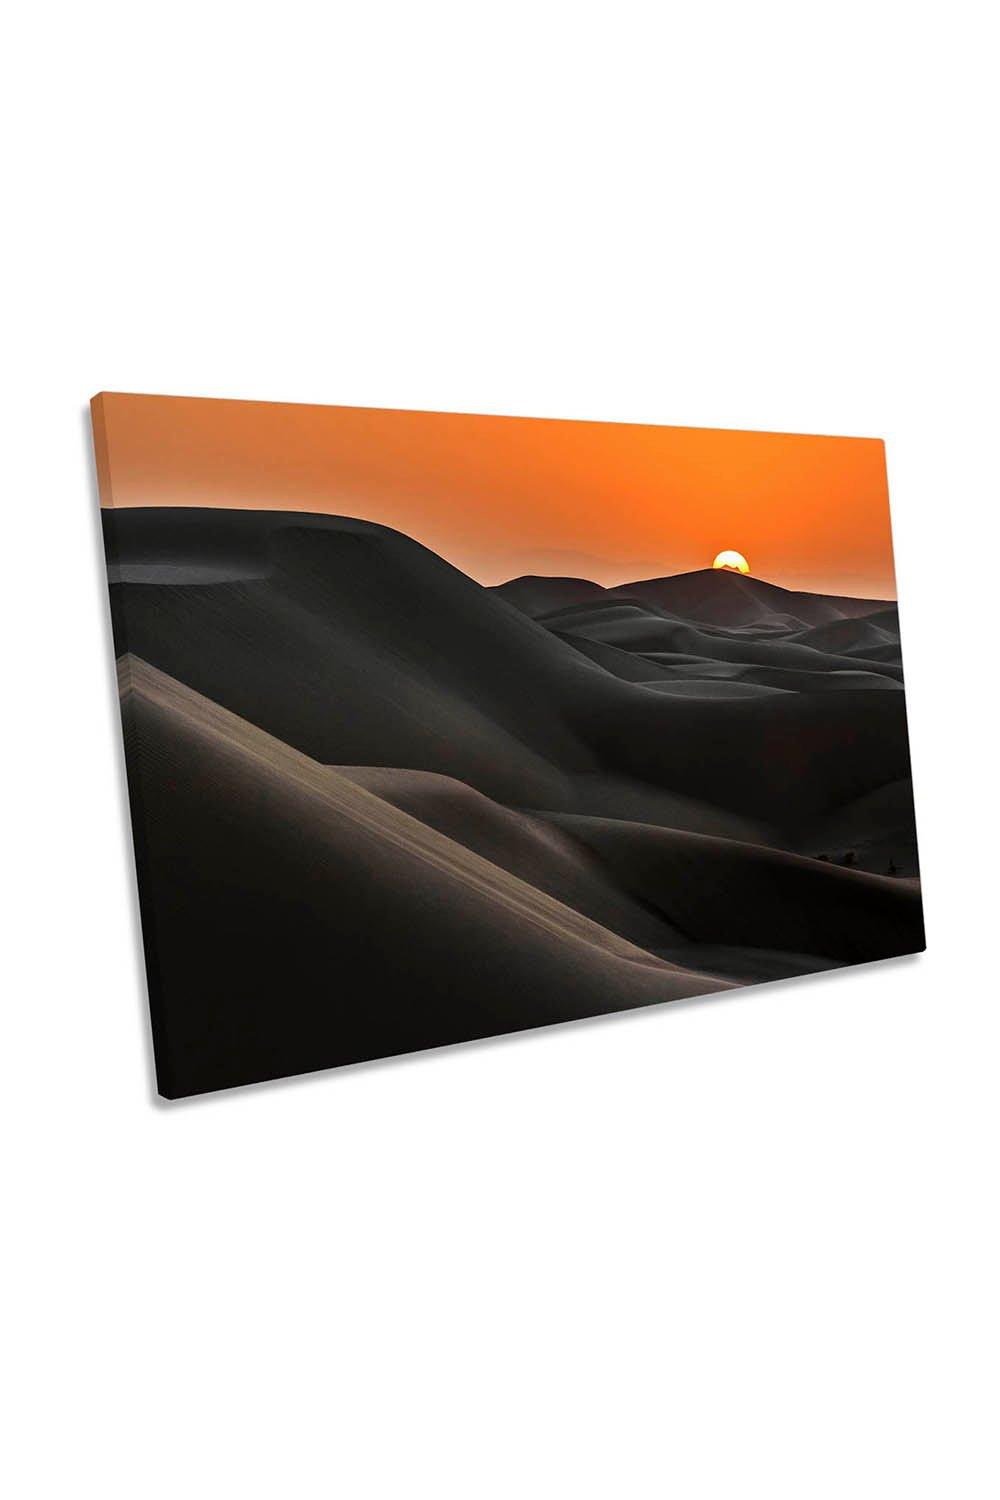 Sunrise behind the Desert Mountains Orange Canvas Wall Art Picture Print